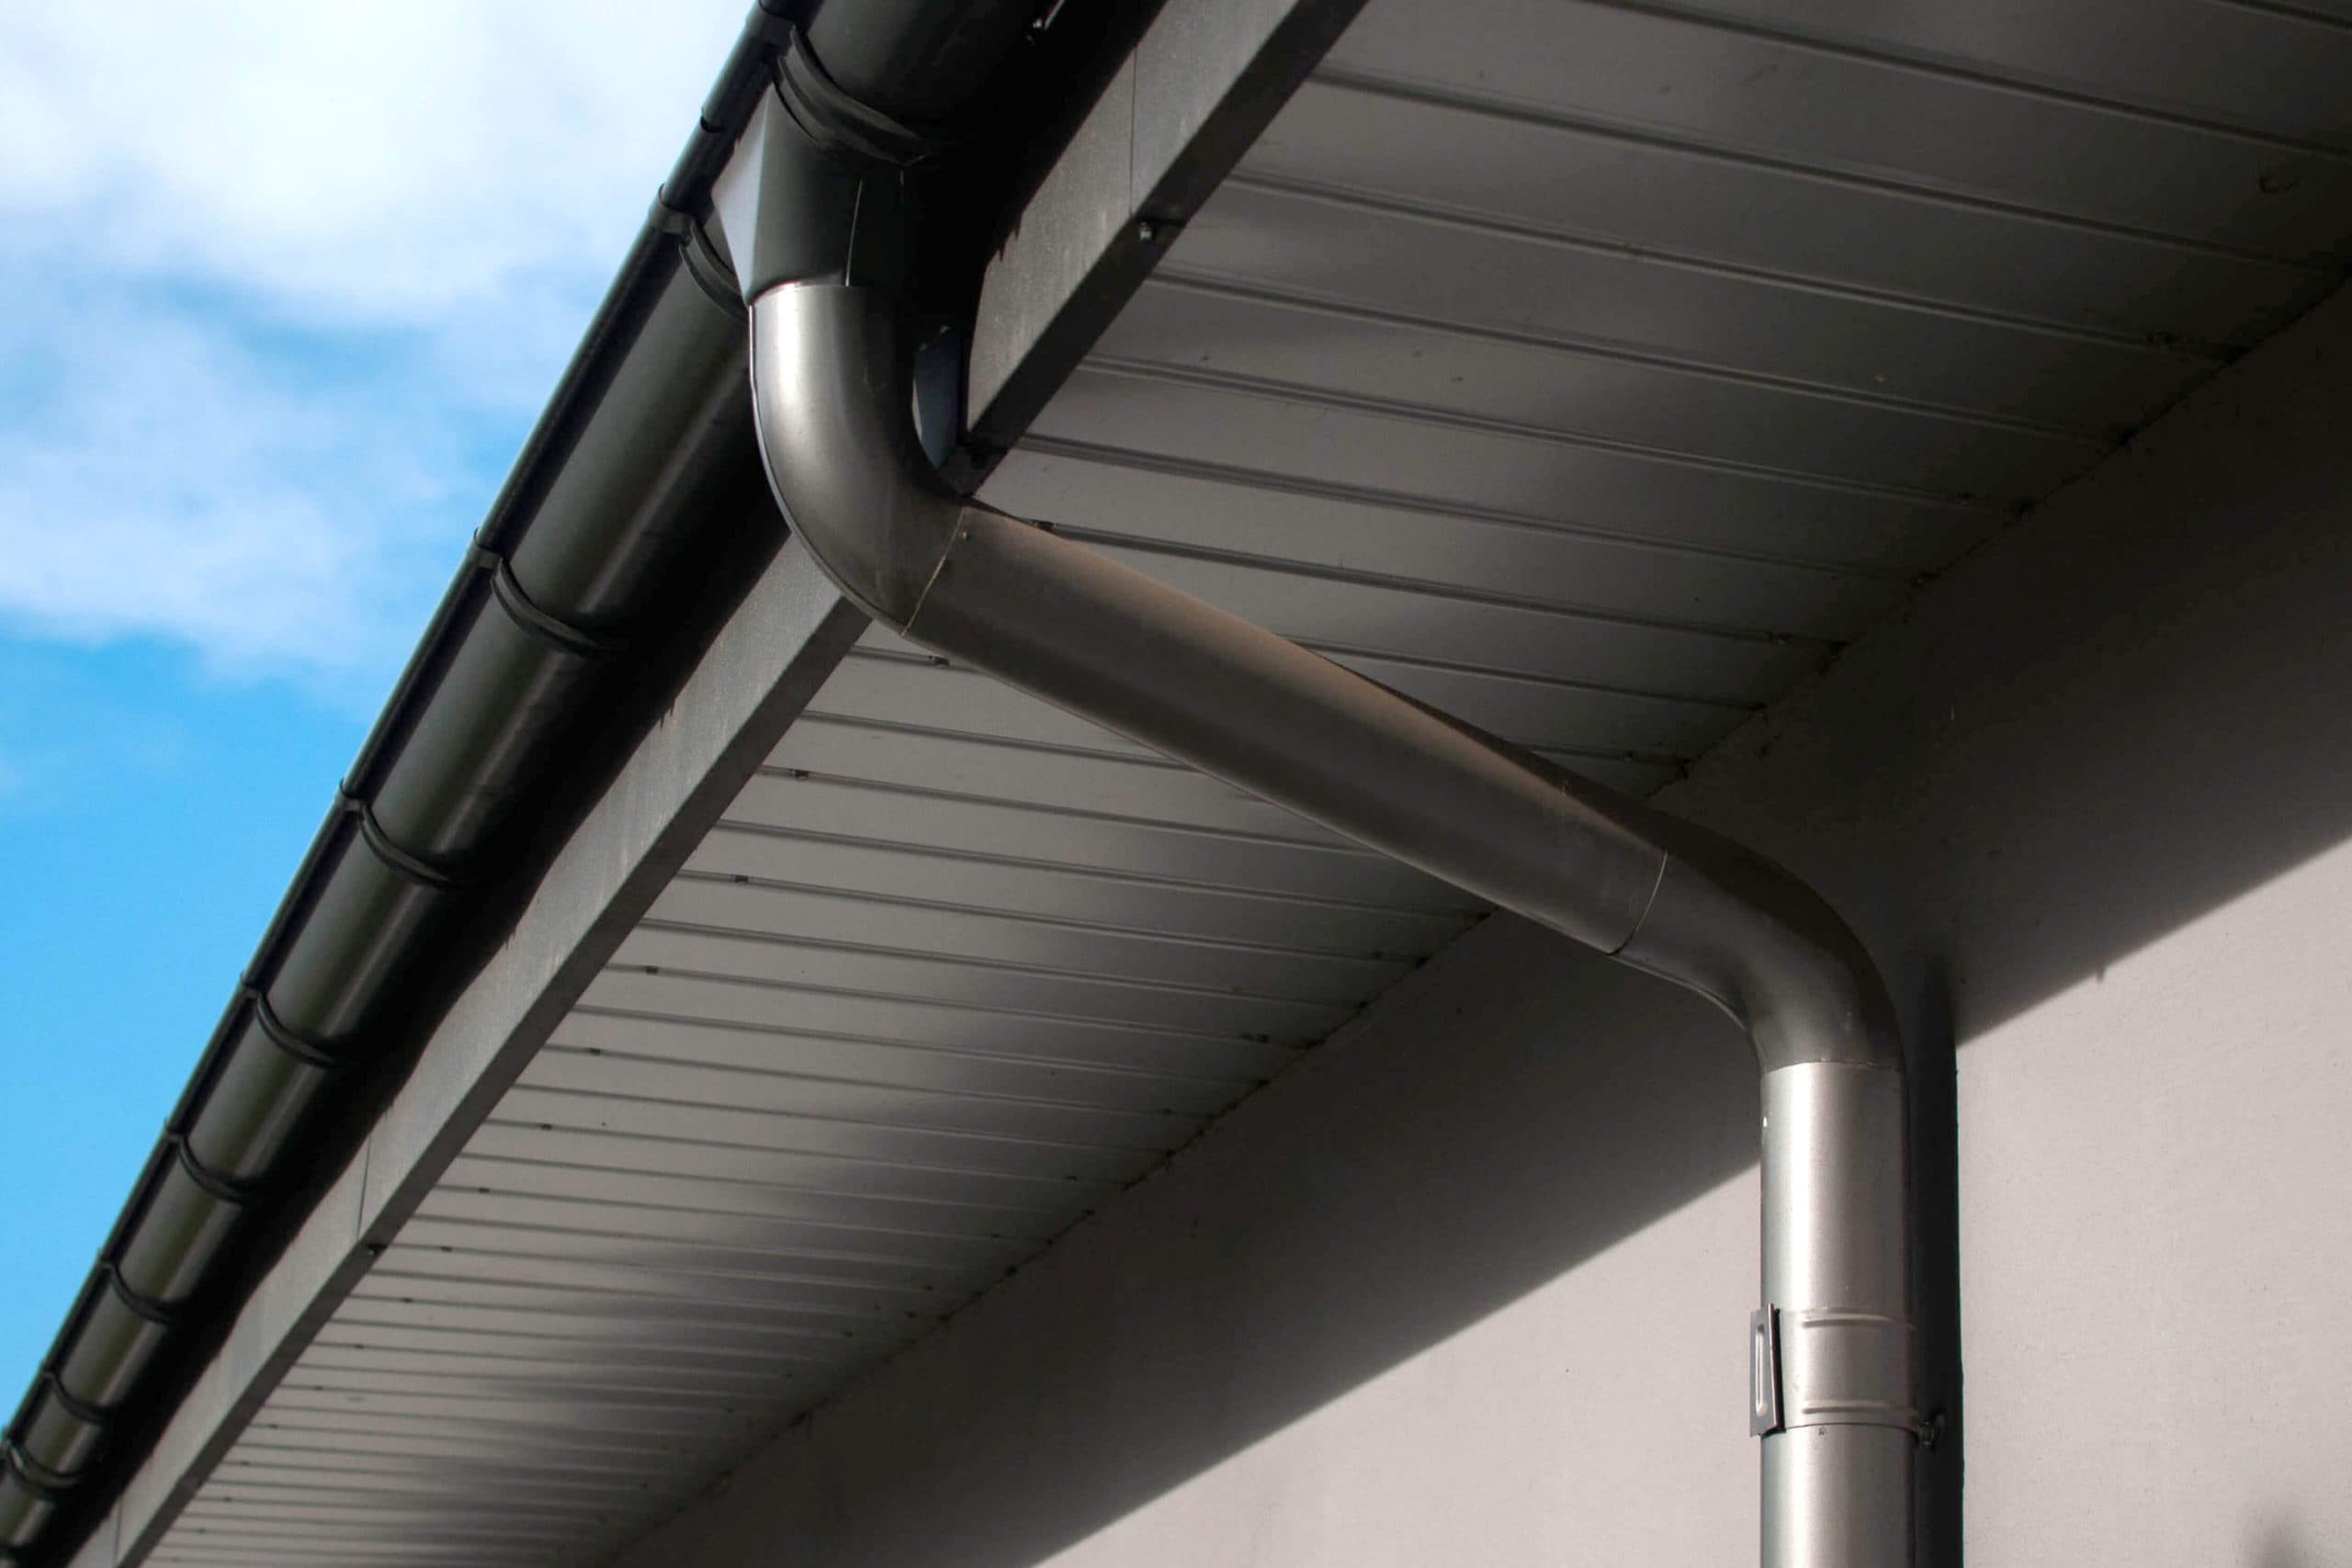 Corrosion-resistant galvanized gutters installed on a commercial building in Spring